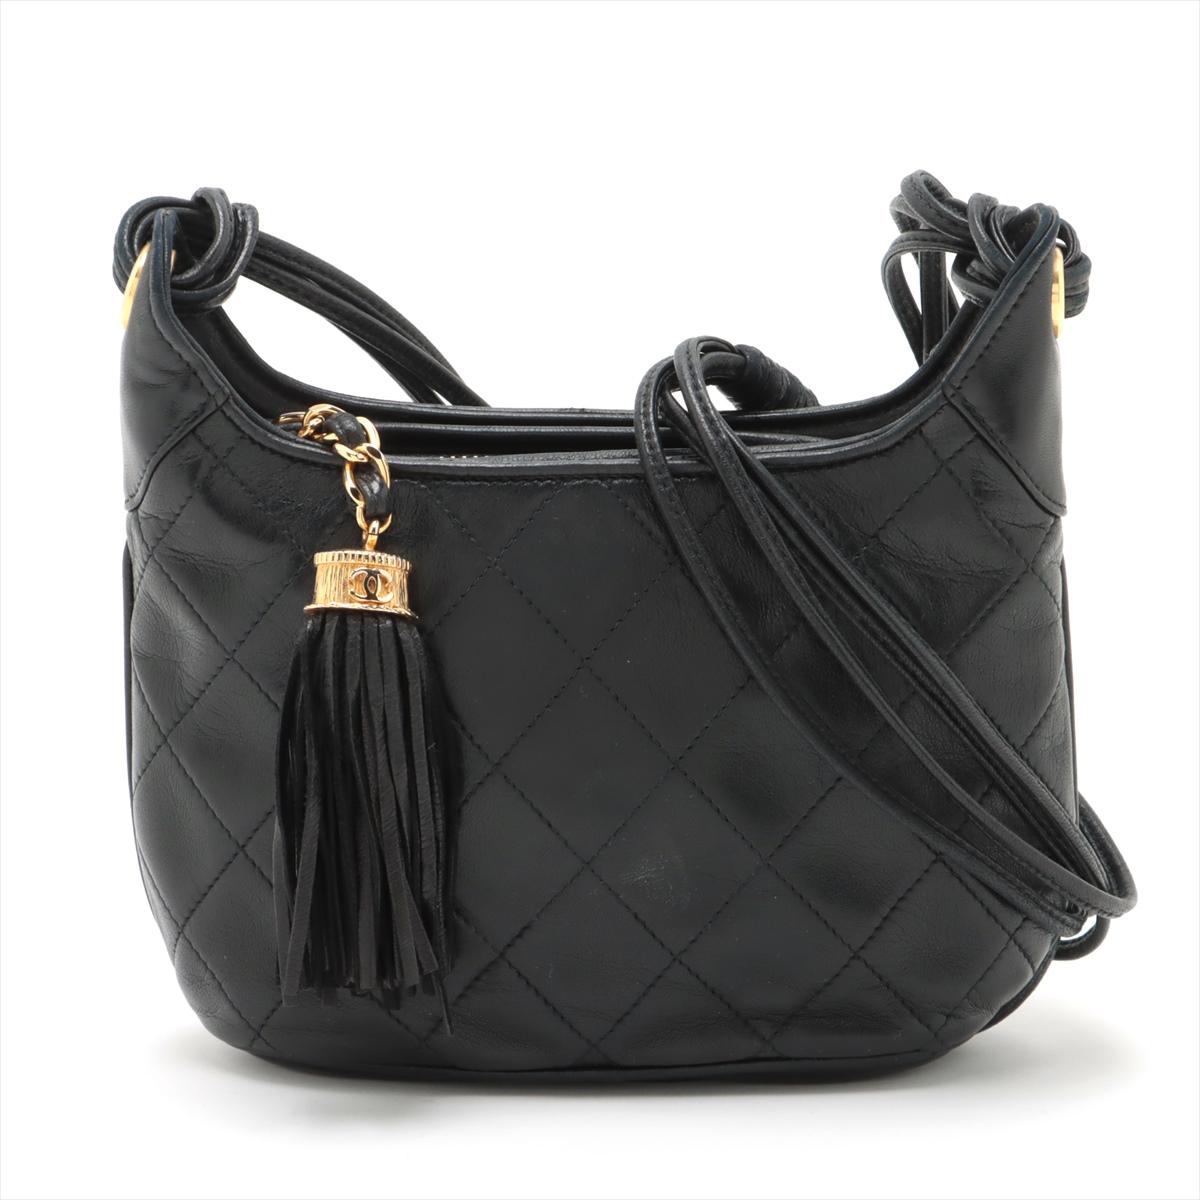 The Chanel Matelassé Lambskin Tassel Shoulder Bag in Black epitomizes sophistication and chic style. Crafted from luxurious lambskin leather, the bag features Chanel's iconic quilted design, a timeless symbol of elegance. The addition of a playful